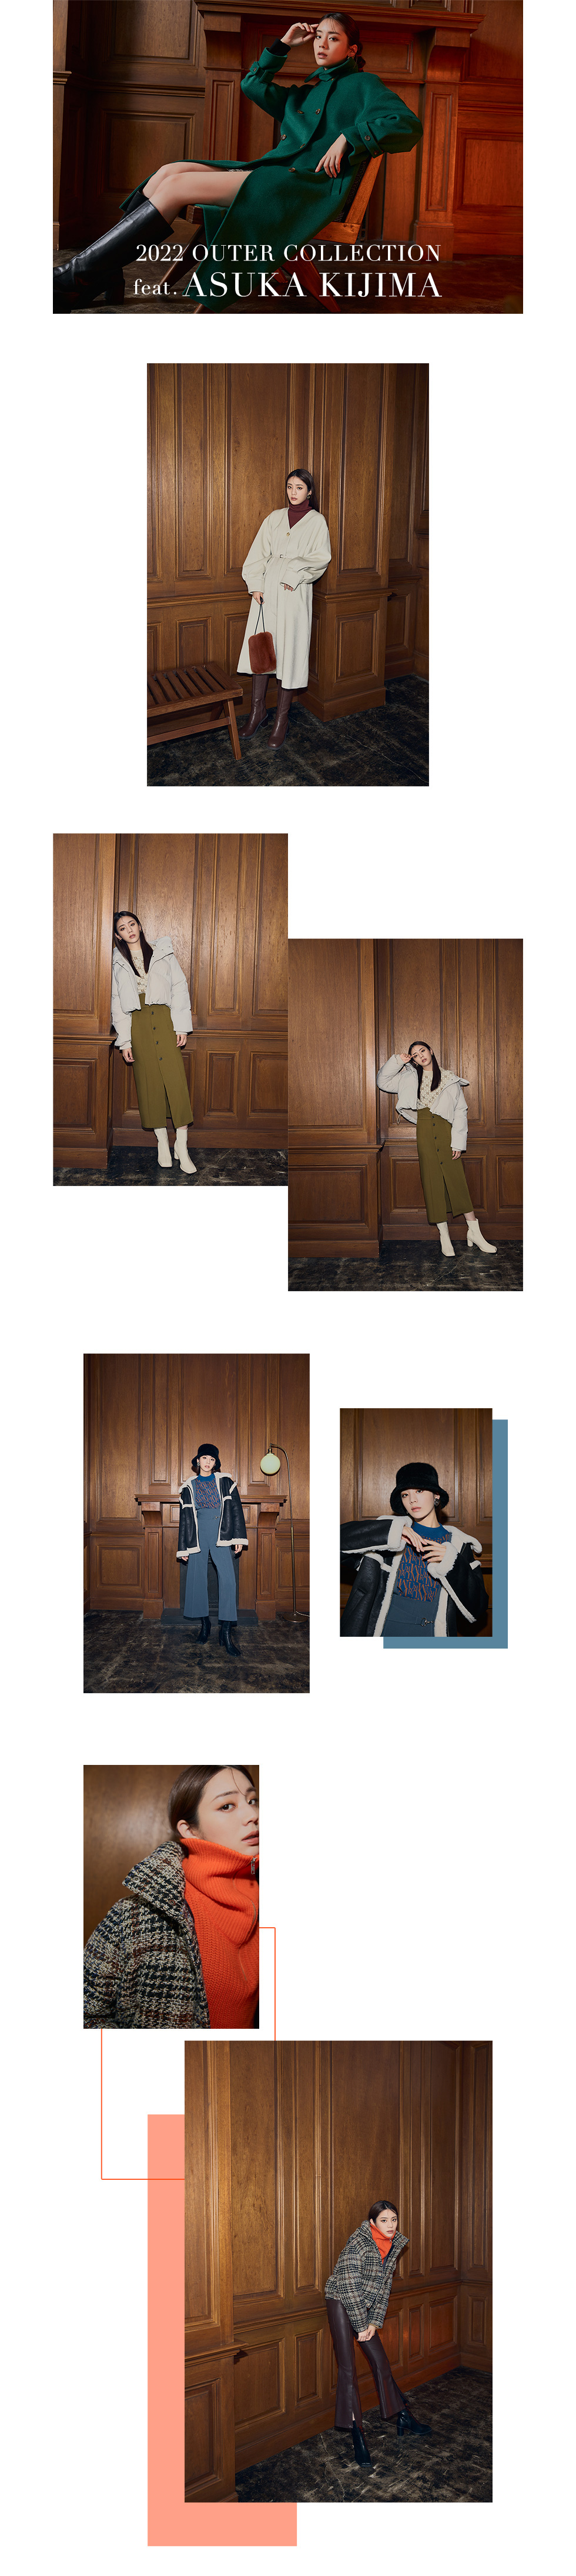 2022 OUTER Collection feat.ASUKA KIJIMA